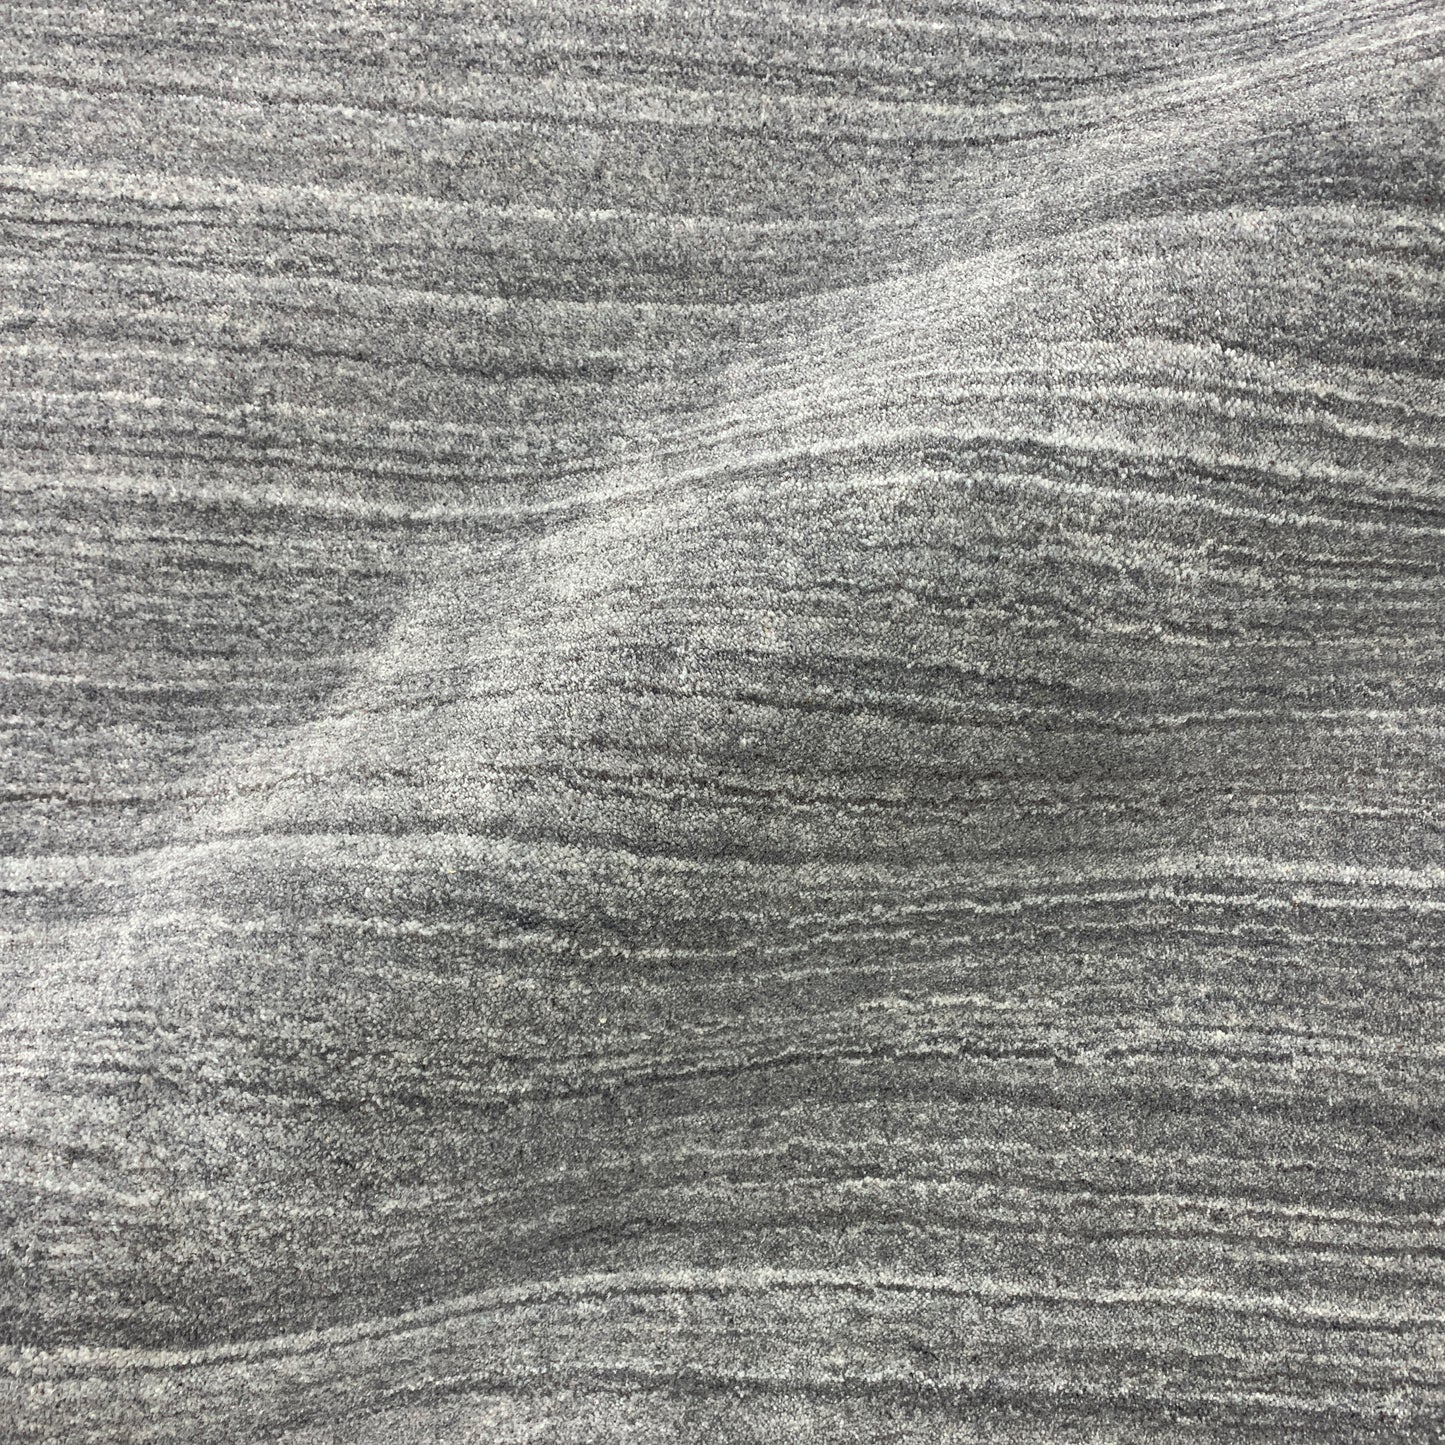 Grey, High Shine, Plush Pile, Viscose and Wool Blended, Modern Solid Handloom Area Rug